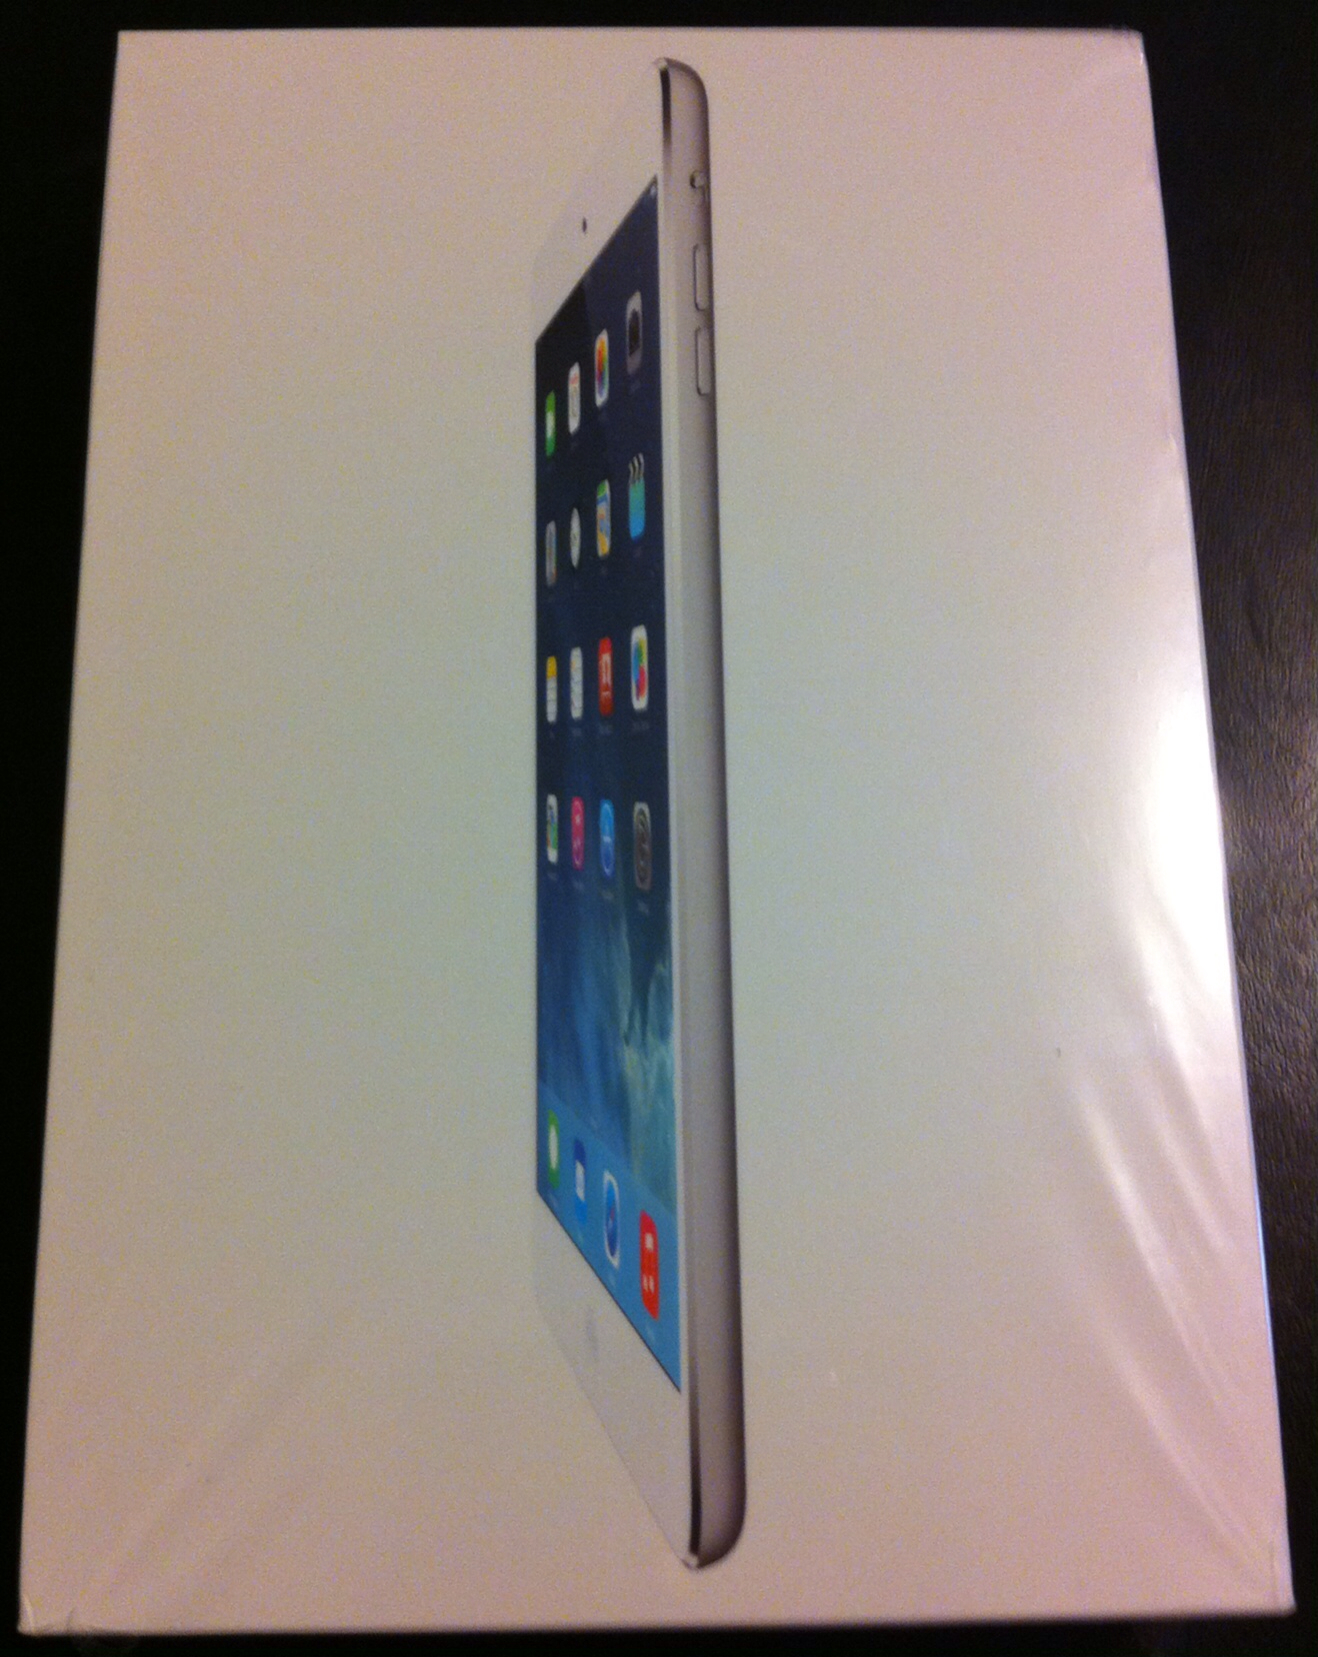 a picture of a new ipad with the front cover open